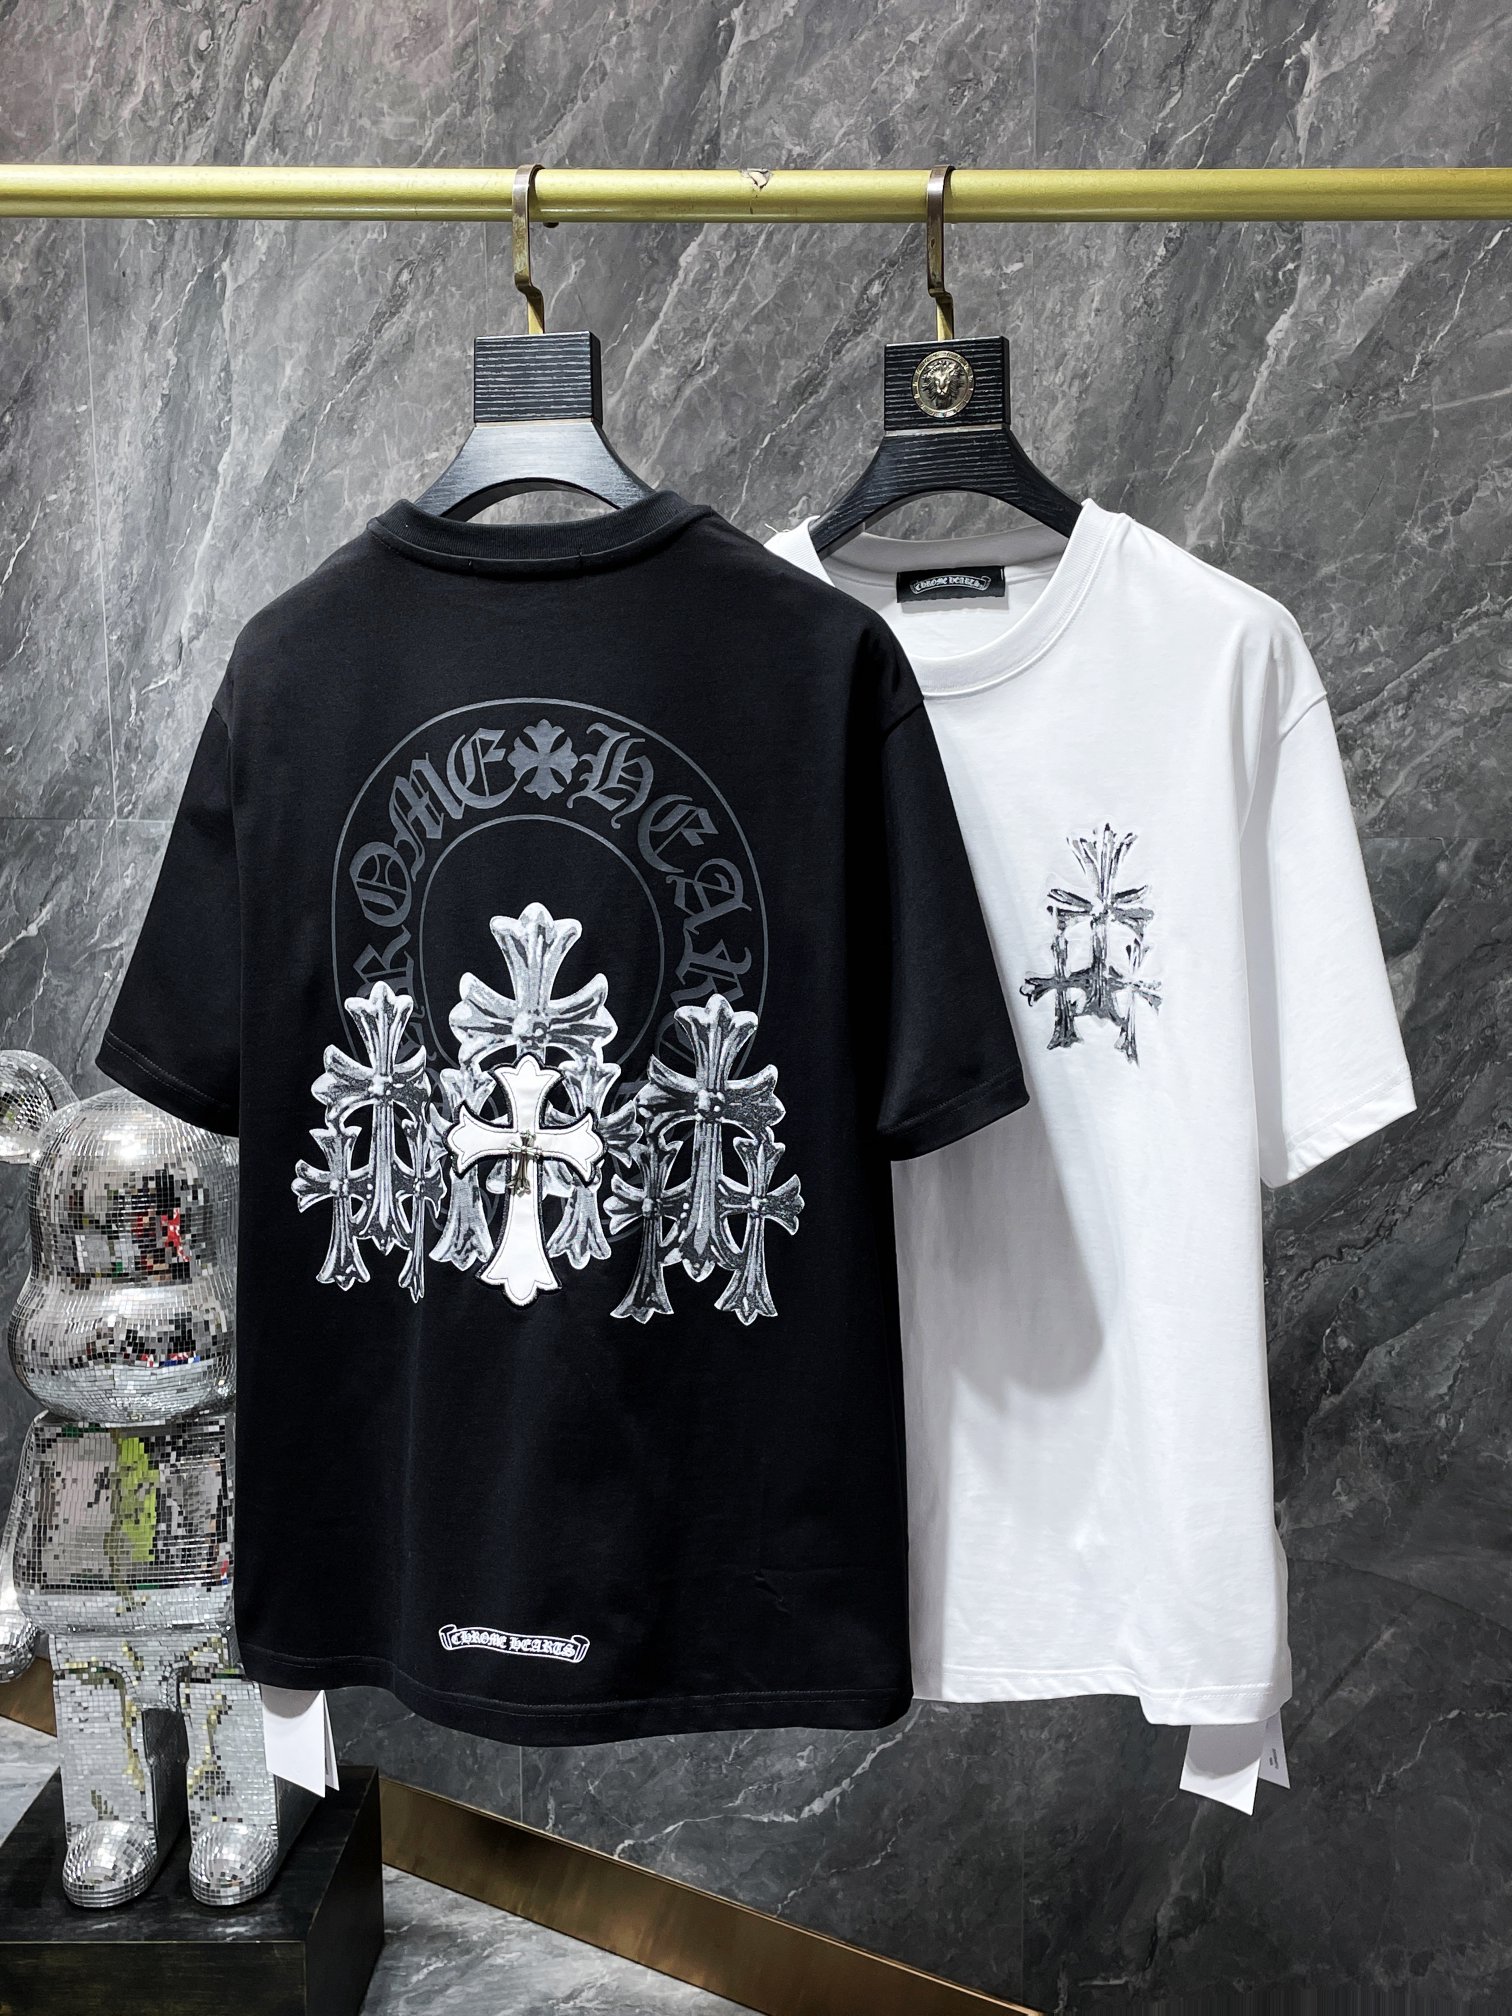 Chrome Hearts Clothing T-Shirt Black White Embroidery Summer Collection Short Sleeve